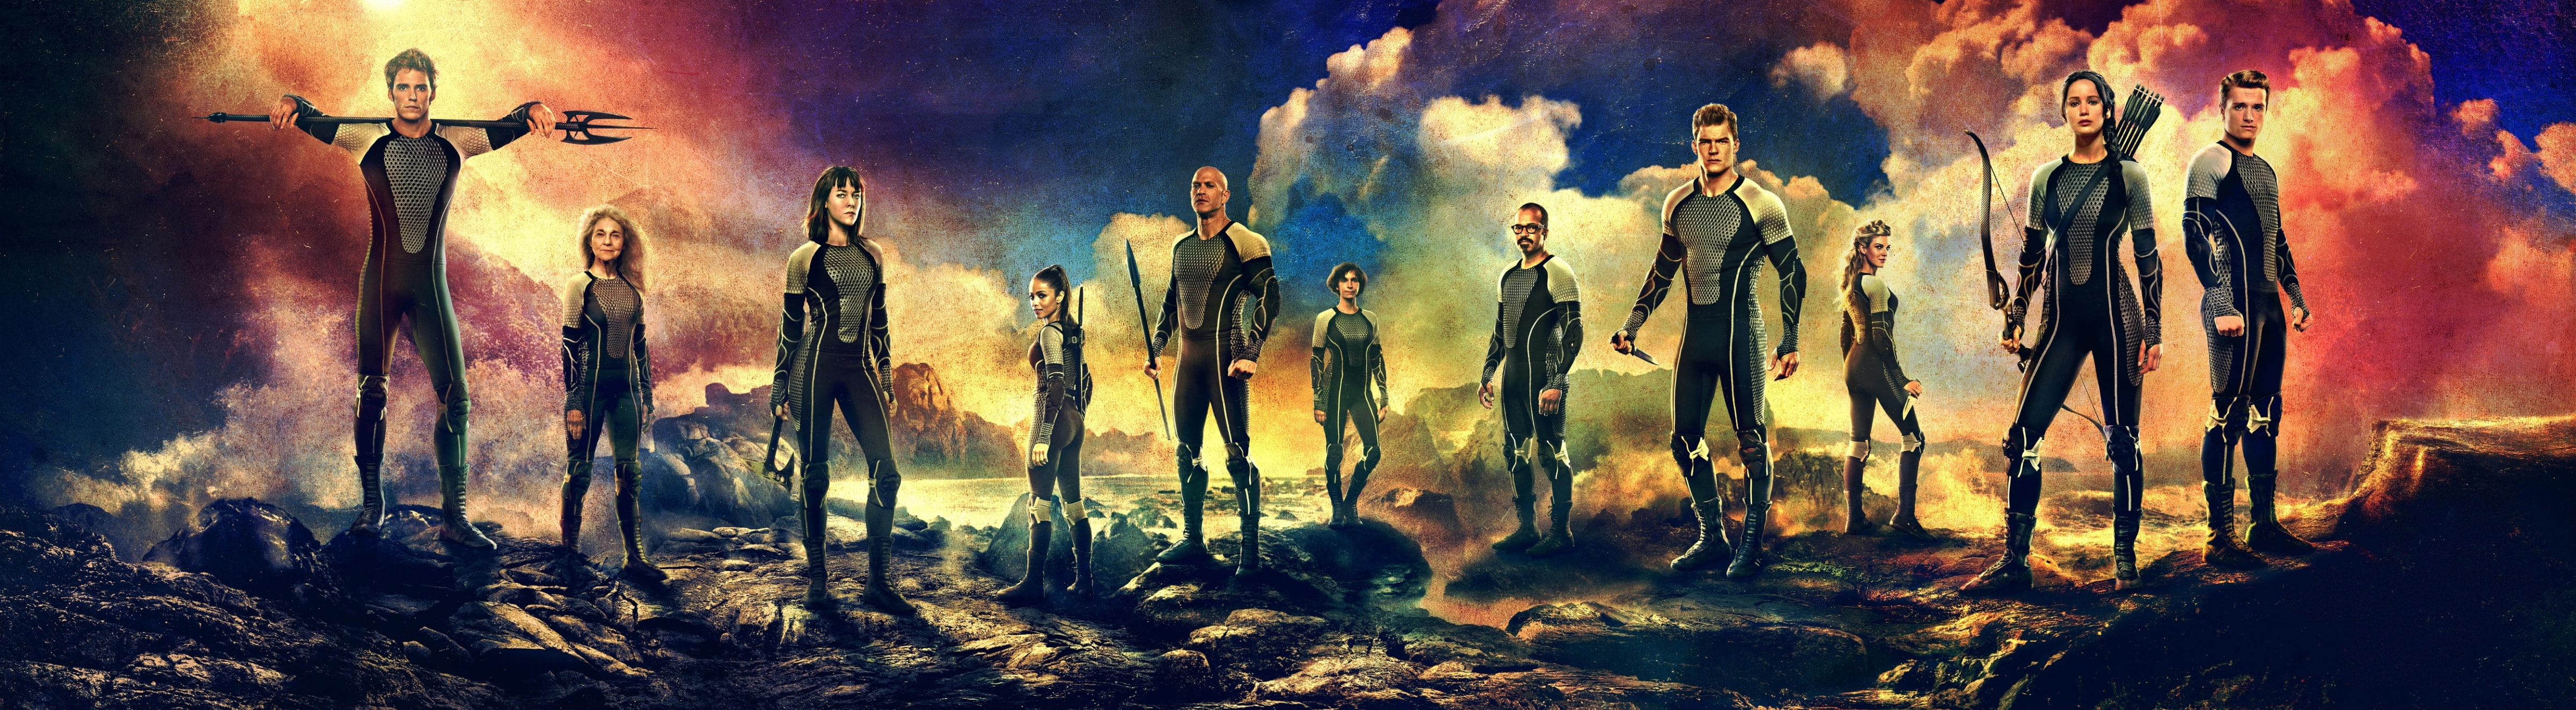 The Hunger Games Catching Fire Cast, Hunger Games wallpaper, Movies